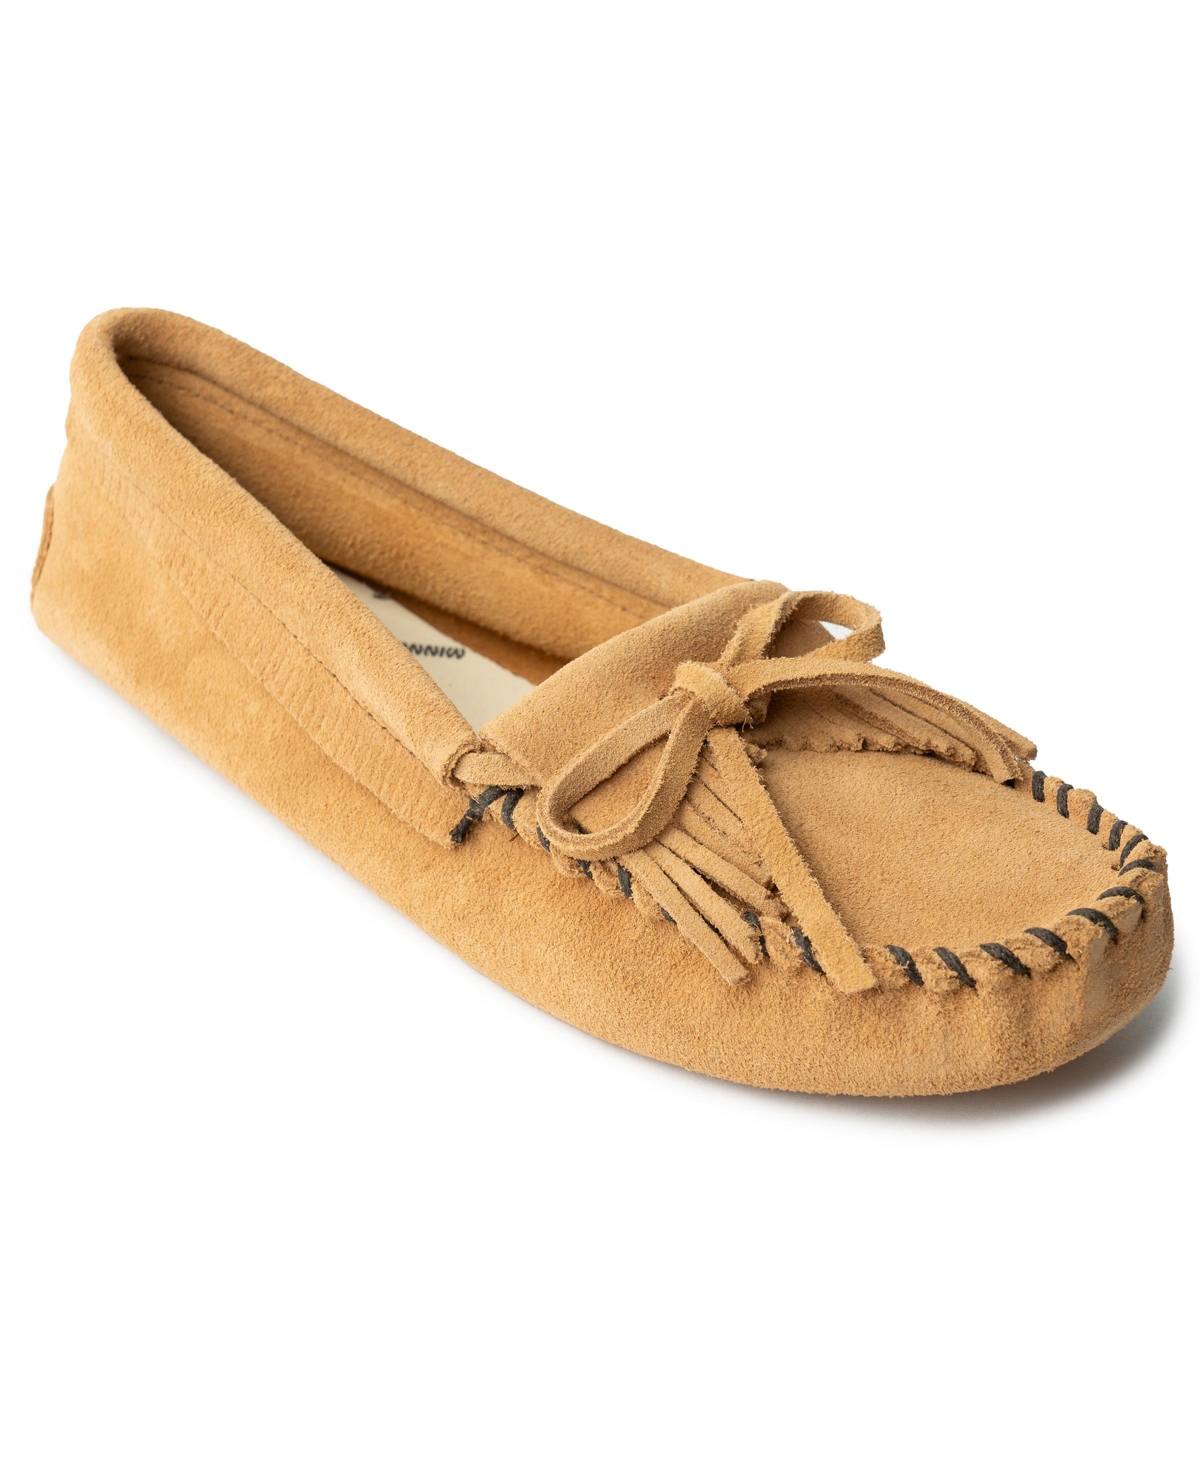 Women's Kilty Softsole Moccasins - Taupe